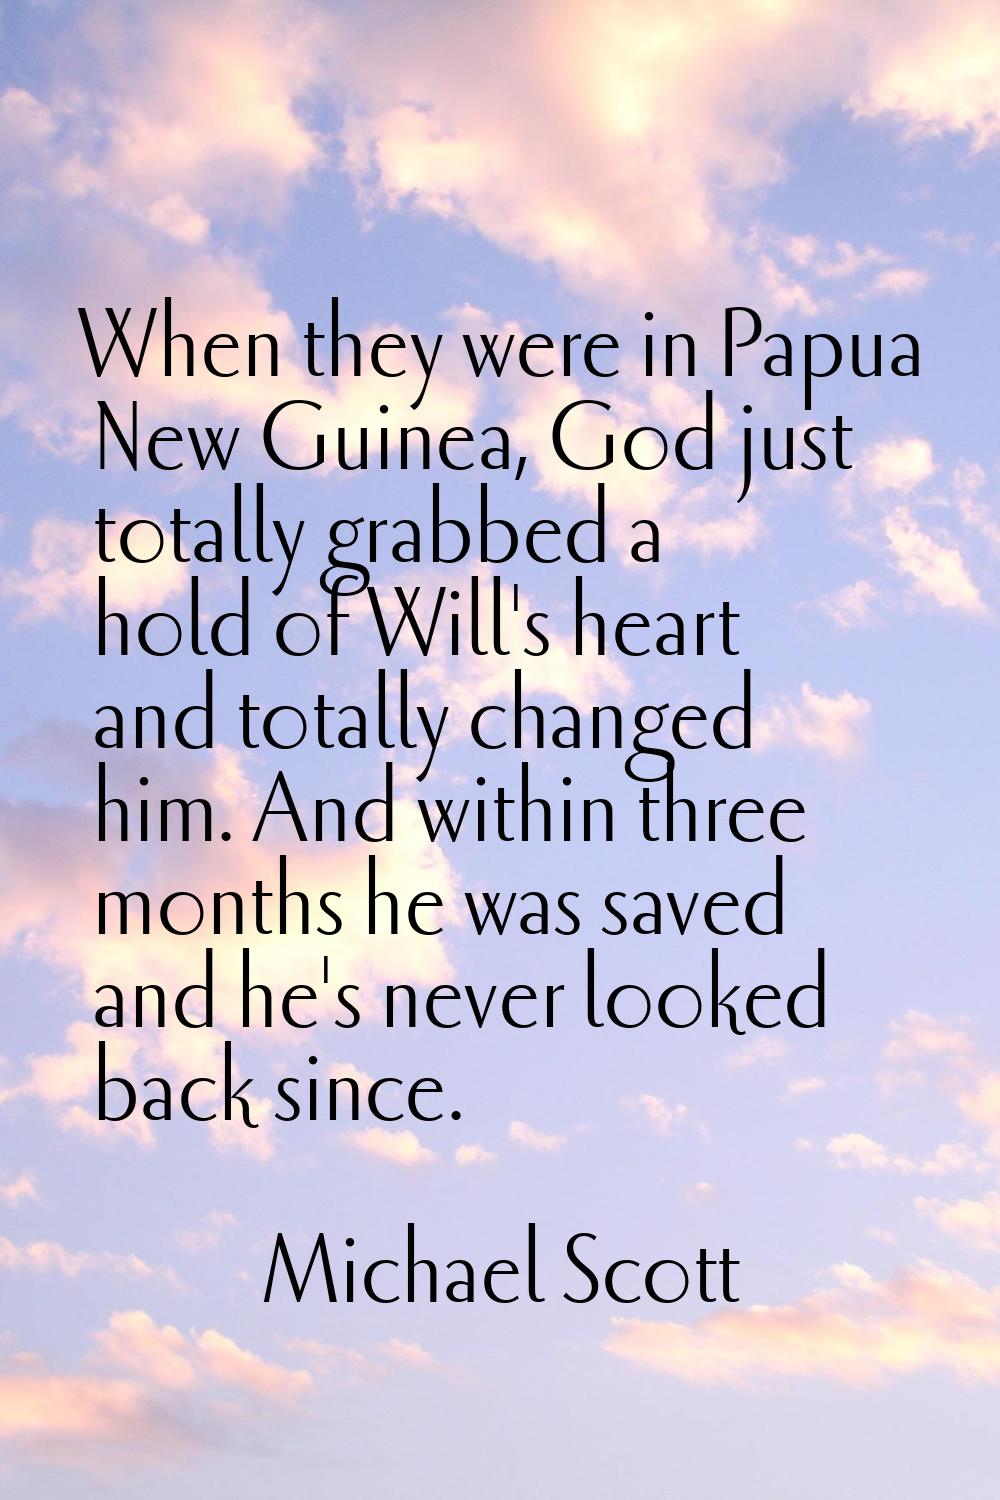 When they were in Papua New Guinea, God just totally grabbed a hold of Will's heart and totally cha